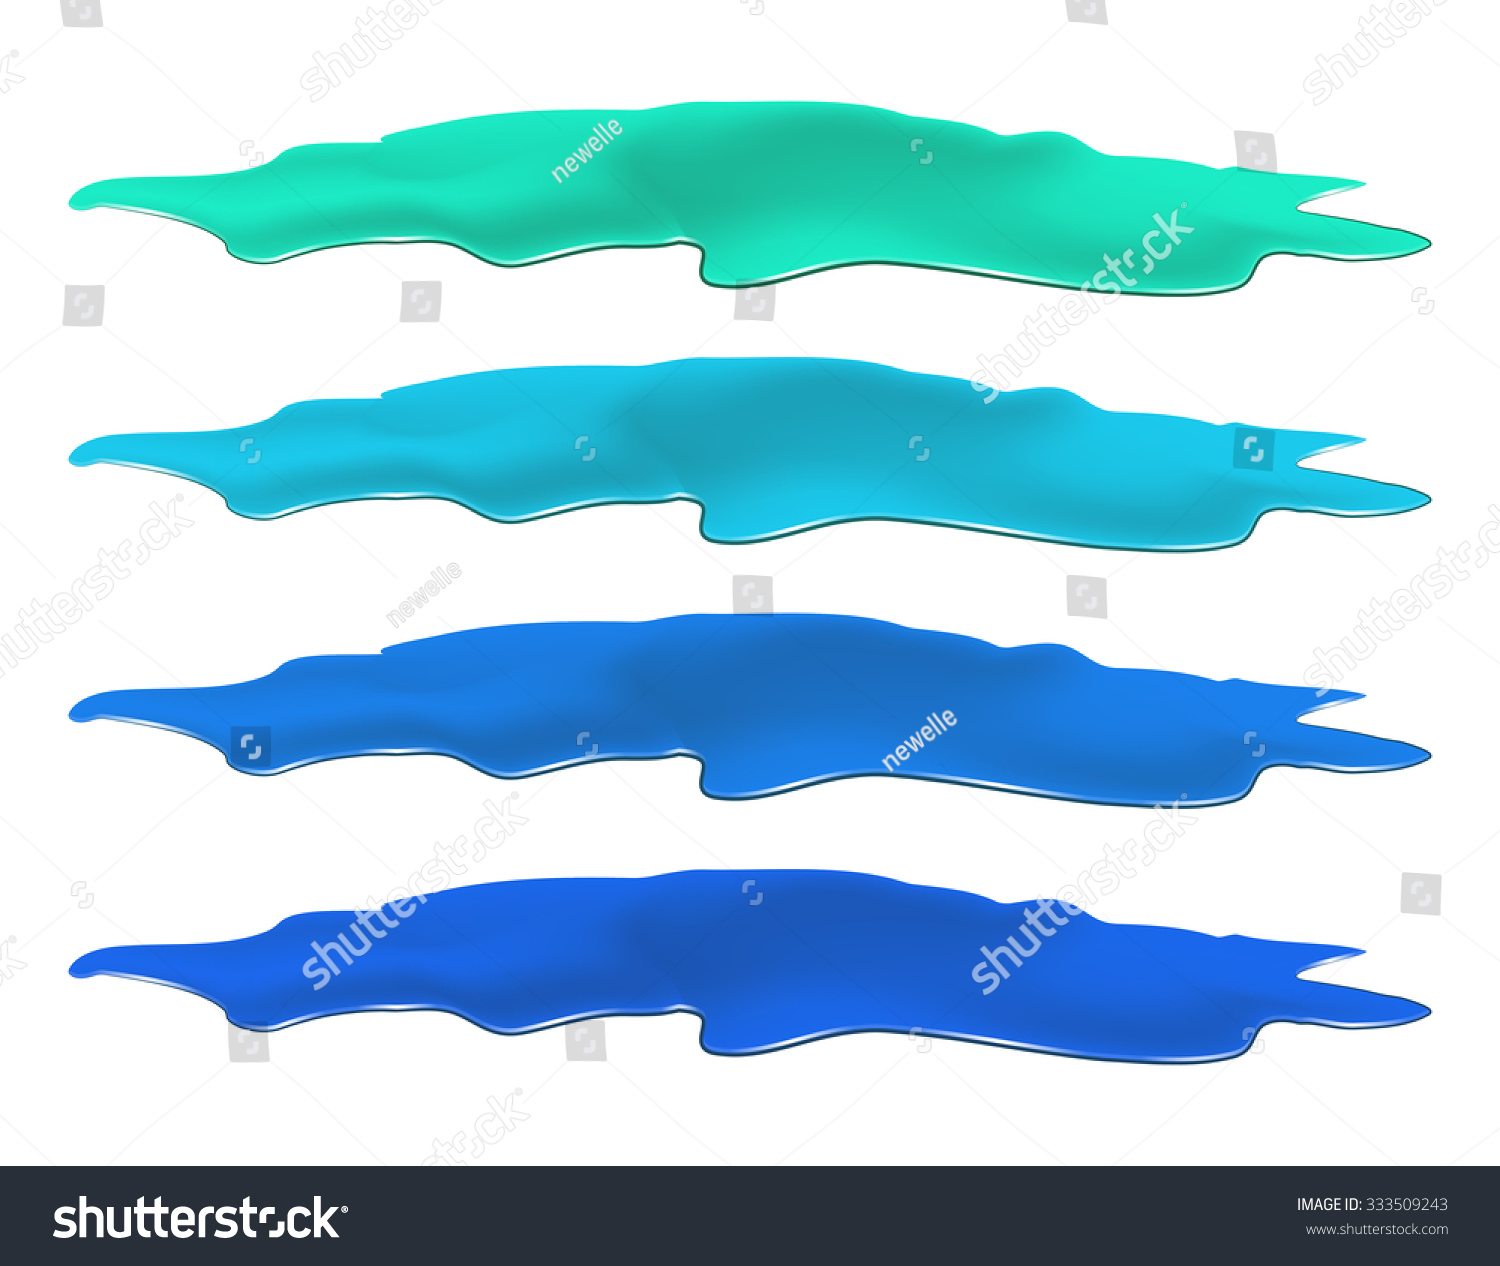 Edit Vectors Free Online - Puddle of water | Shutterstock Editor